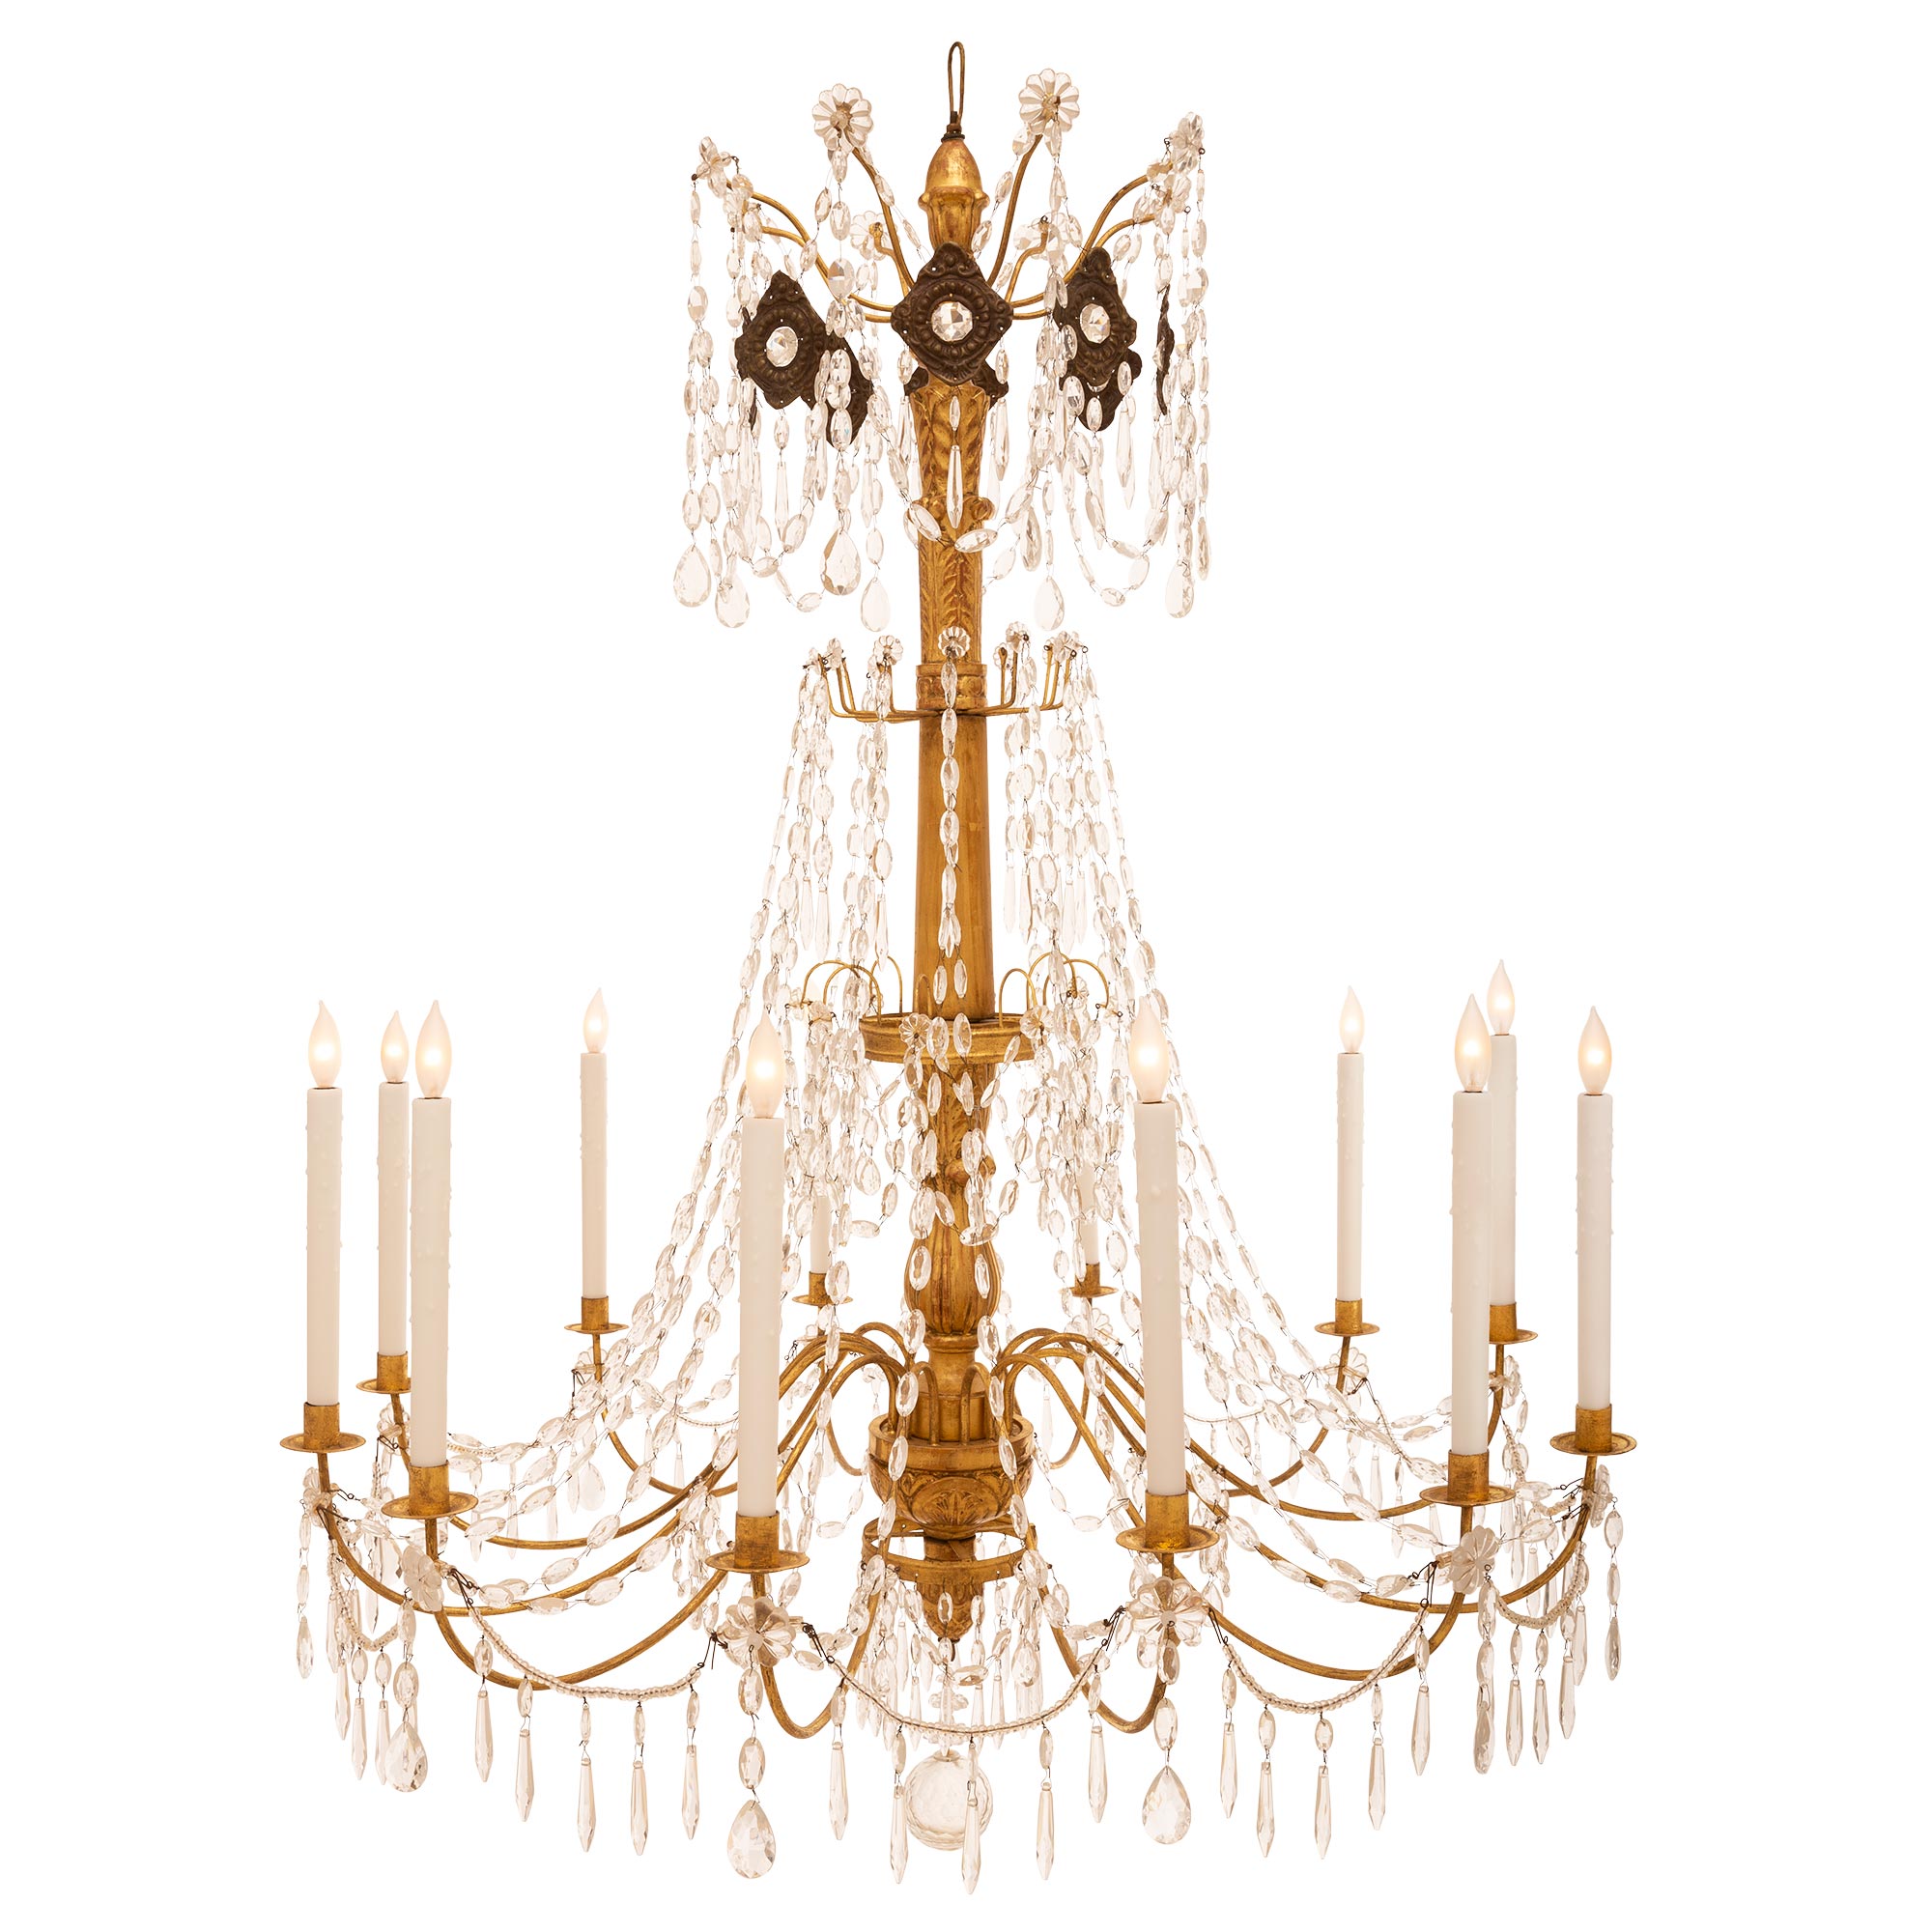 Italian 19th Century Giltwood and Gold Leaf on Metal Chandelier For Sale